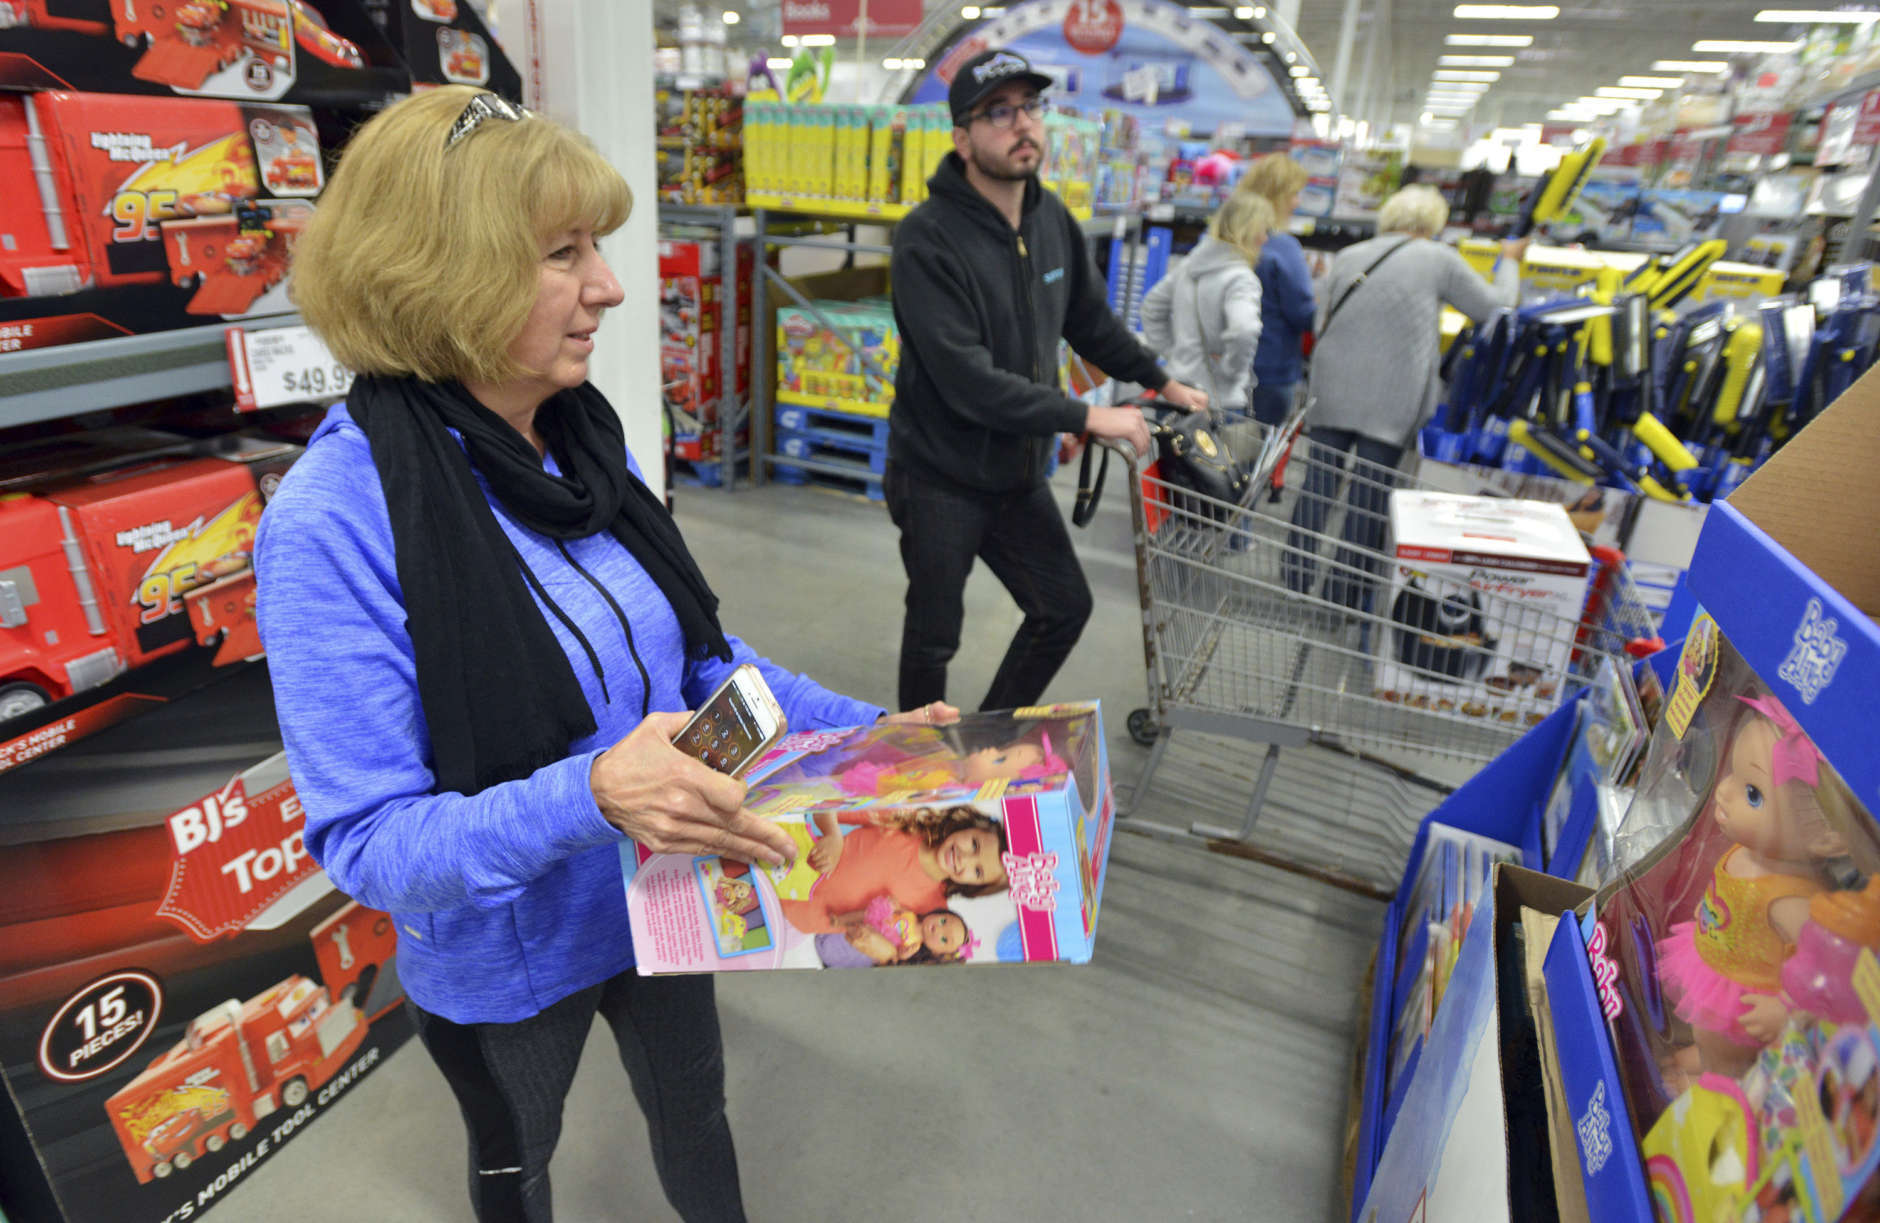 IMAGE DISTRIBUTED FOR BJ'S WHOLESALE CLUB - BJ's Wholesale Club member Kim Perion of Kingston, Mass., and her son Ben Krouse of Northborough, Mass., shop BJ's Top 10 Toys during the retailer's Black Friday Savings Event on Friday, Nov. 24, 2017 in Northborough, Mass. (Josh Reynolds/AP Images for BJ's Wholesale Club)